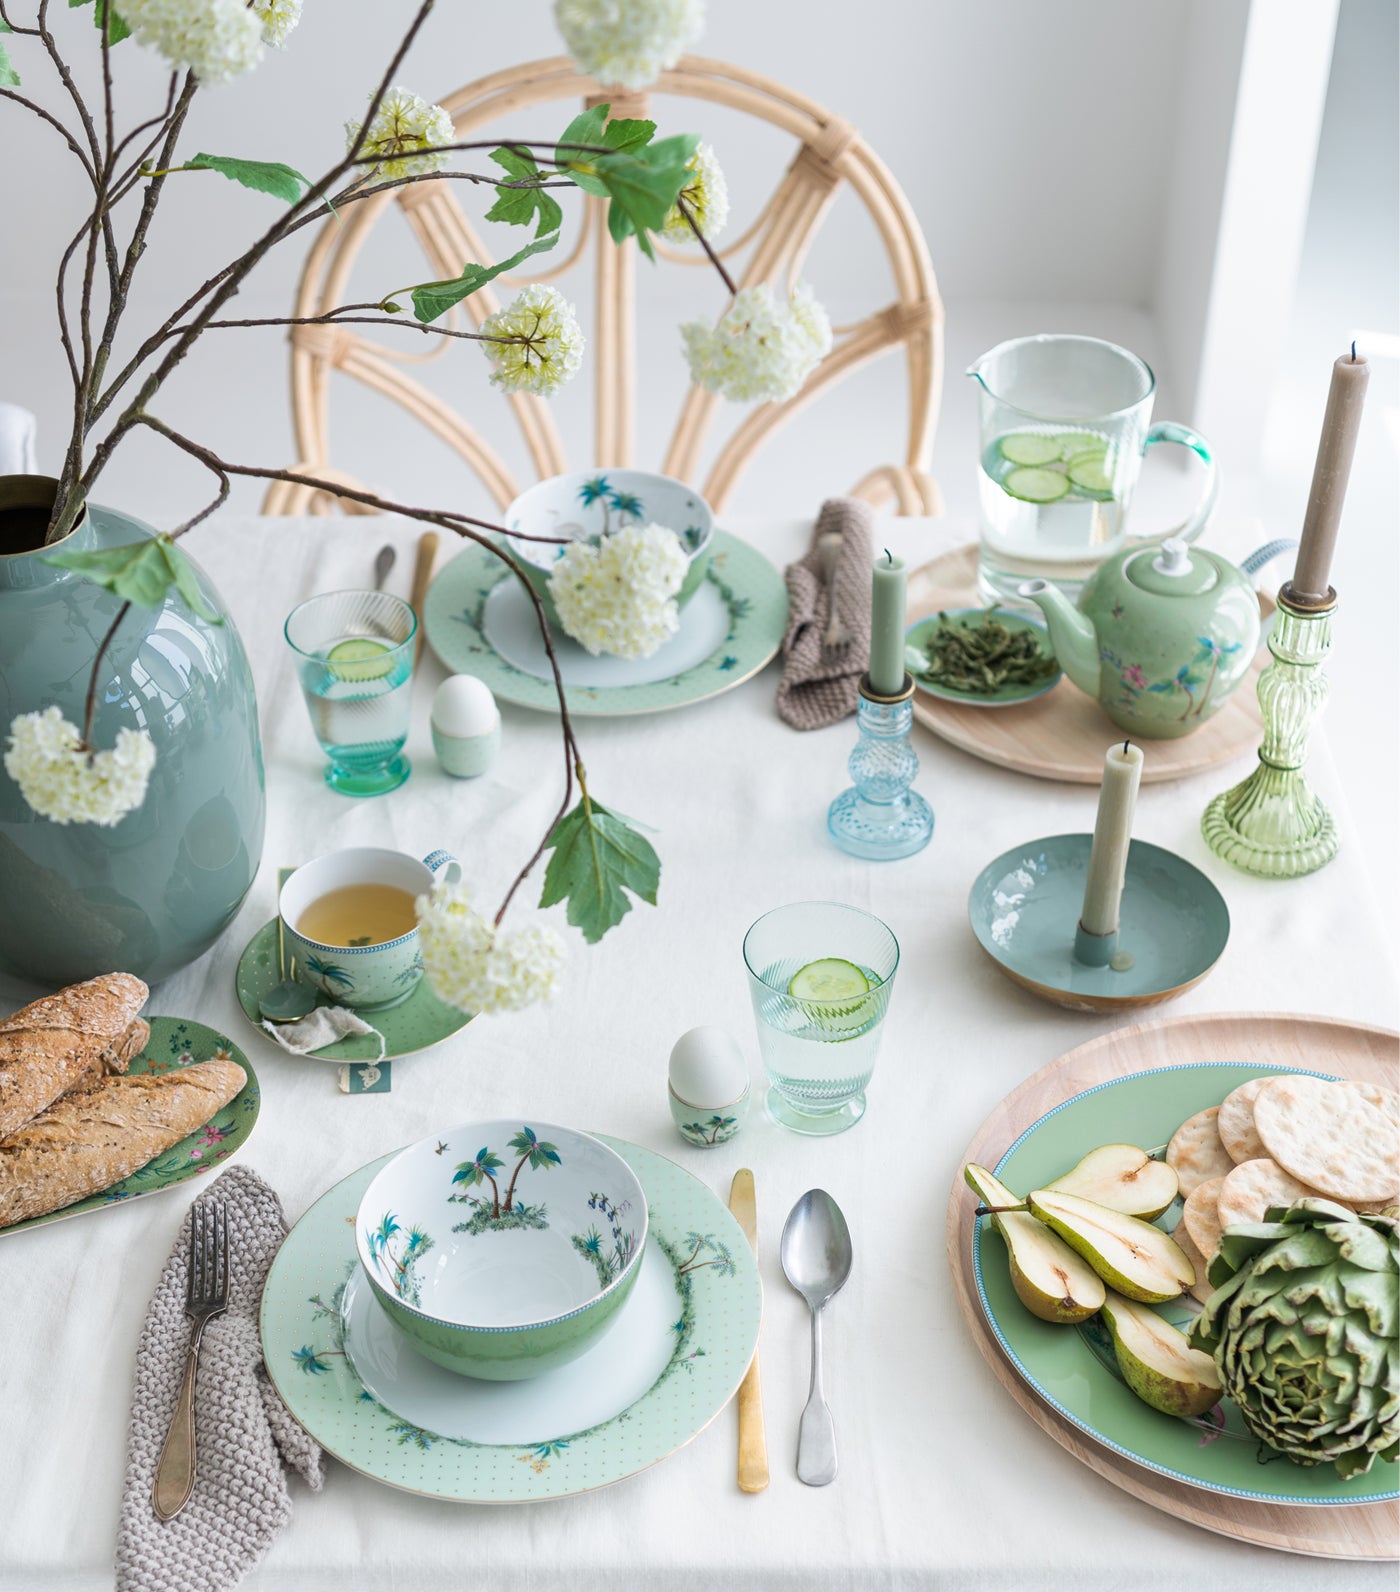 Rustan's - Another classic: Pip Studio's Spring to Life